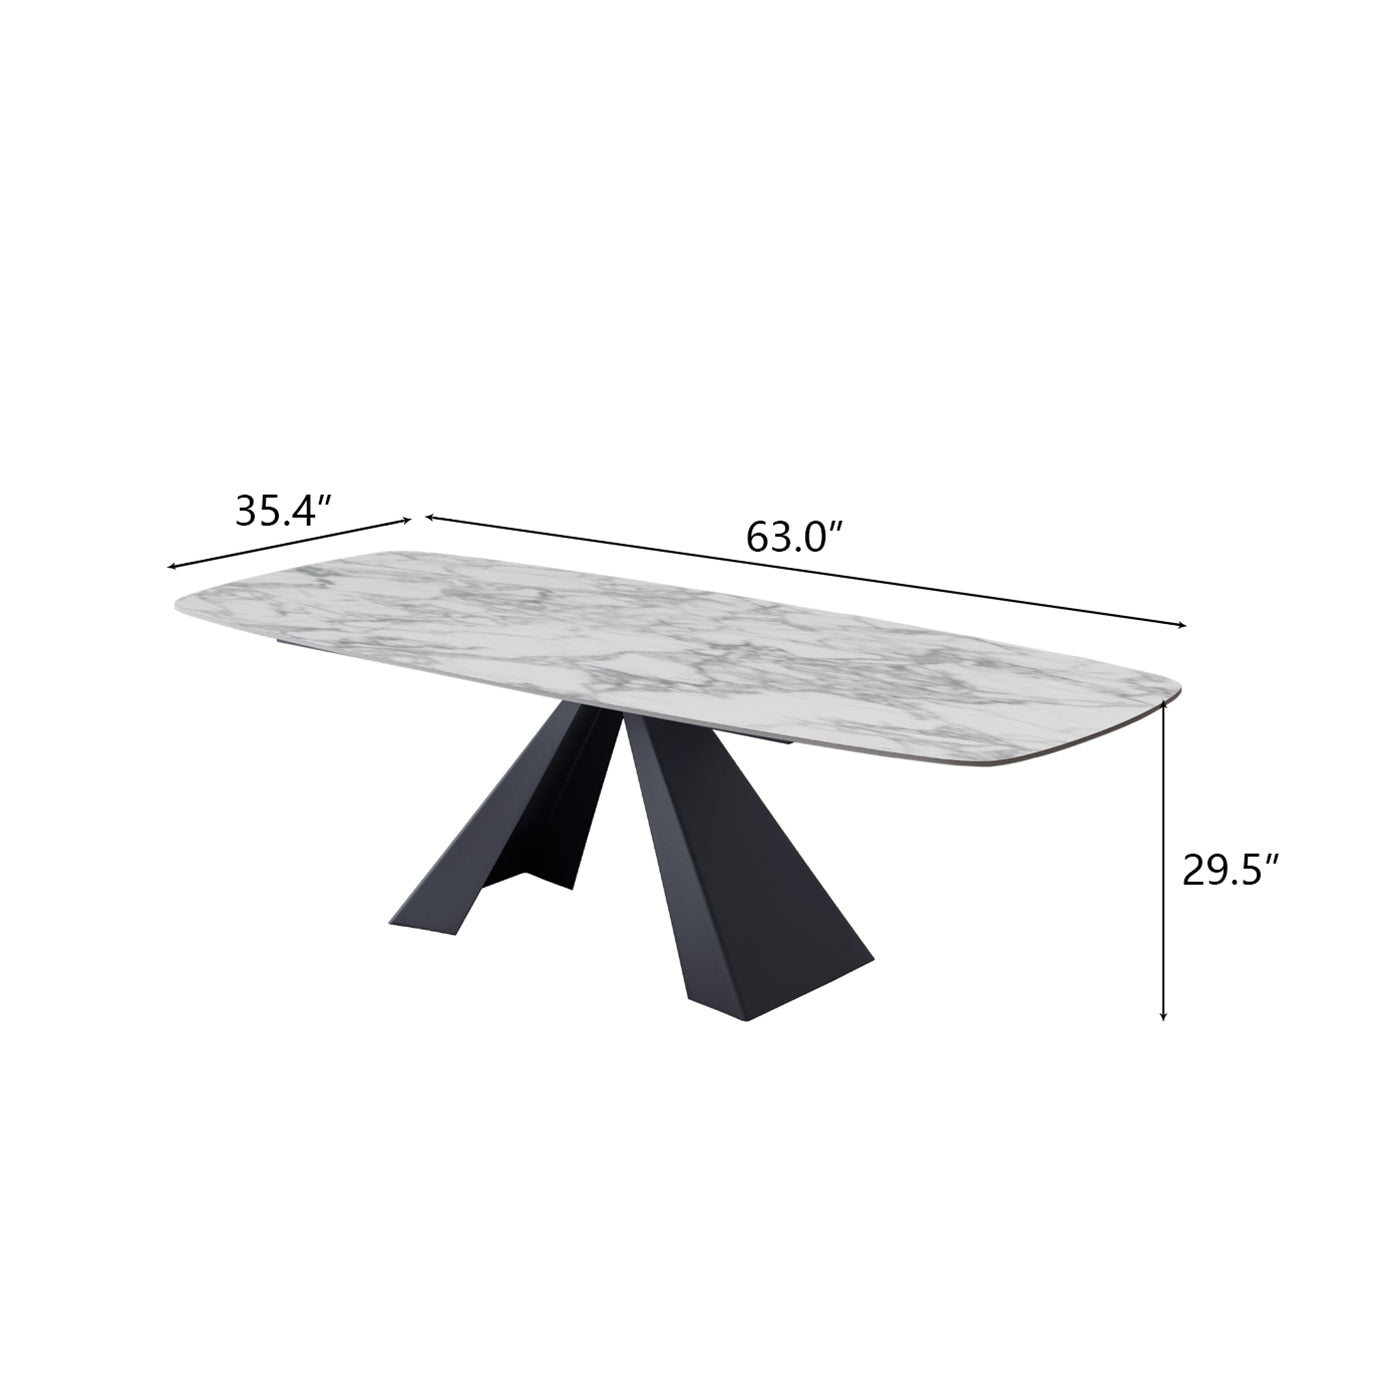 Modern White Pedestal Kitchen Table for 4-8 with Rectangular Sintered Stone Tabletop, Tower-Shaped Design, Carbon Steel Base